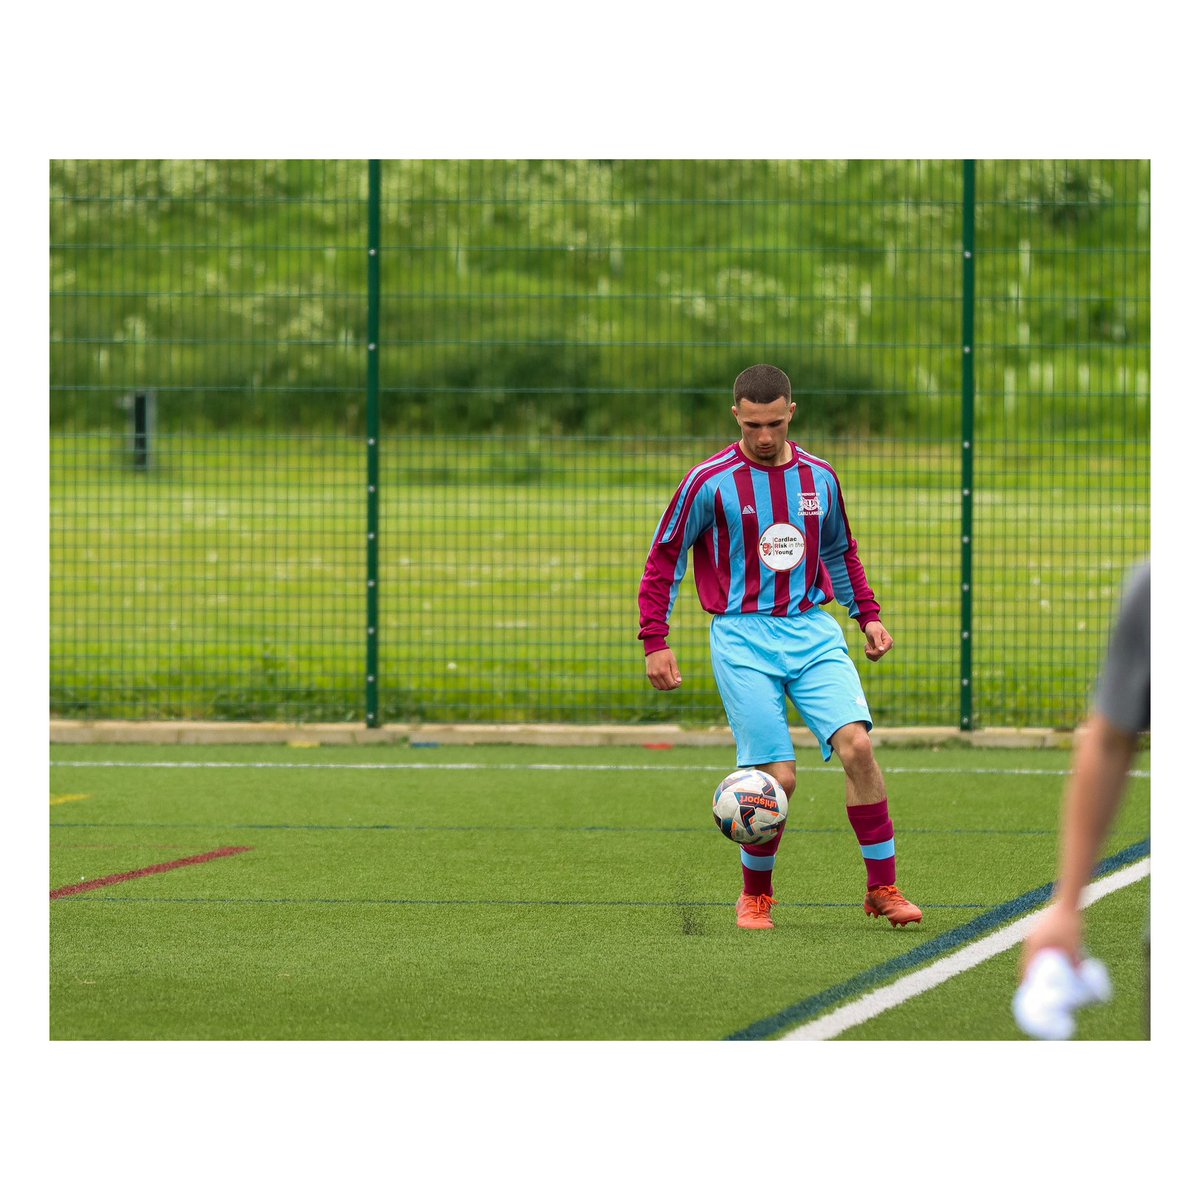 Chance encounter to take some pictures for a charity football match for Carli lansley foundation. 

#photography #photographer #footballphotography #footballphotographer